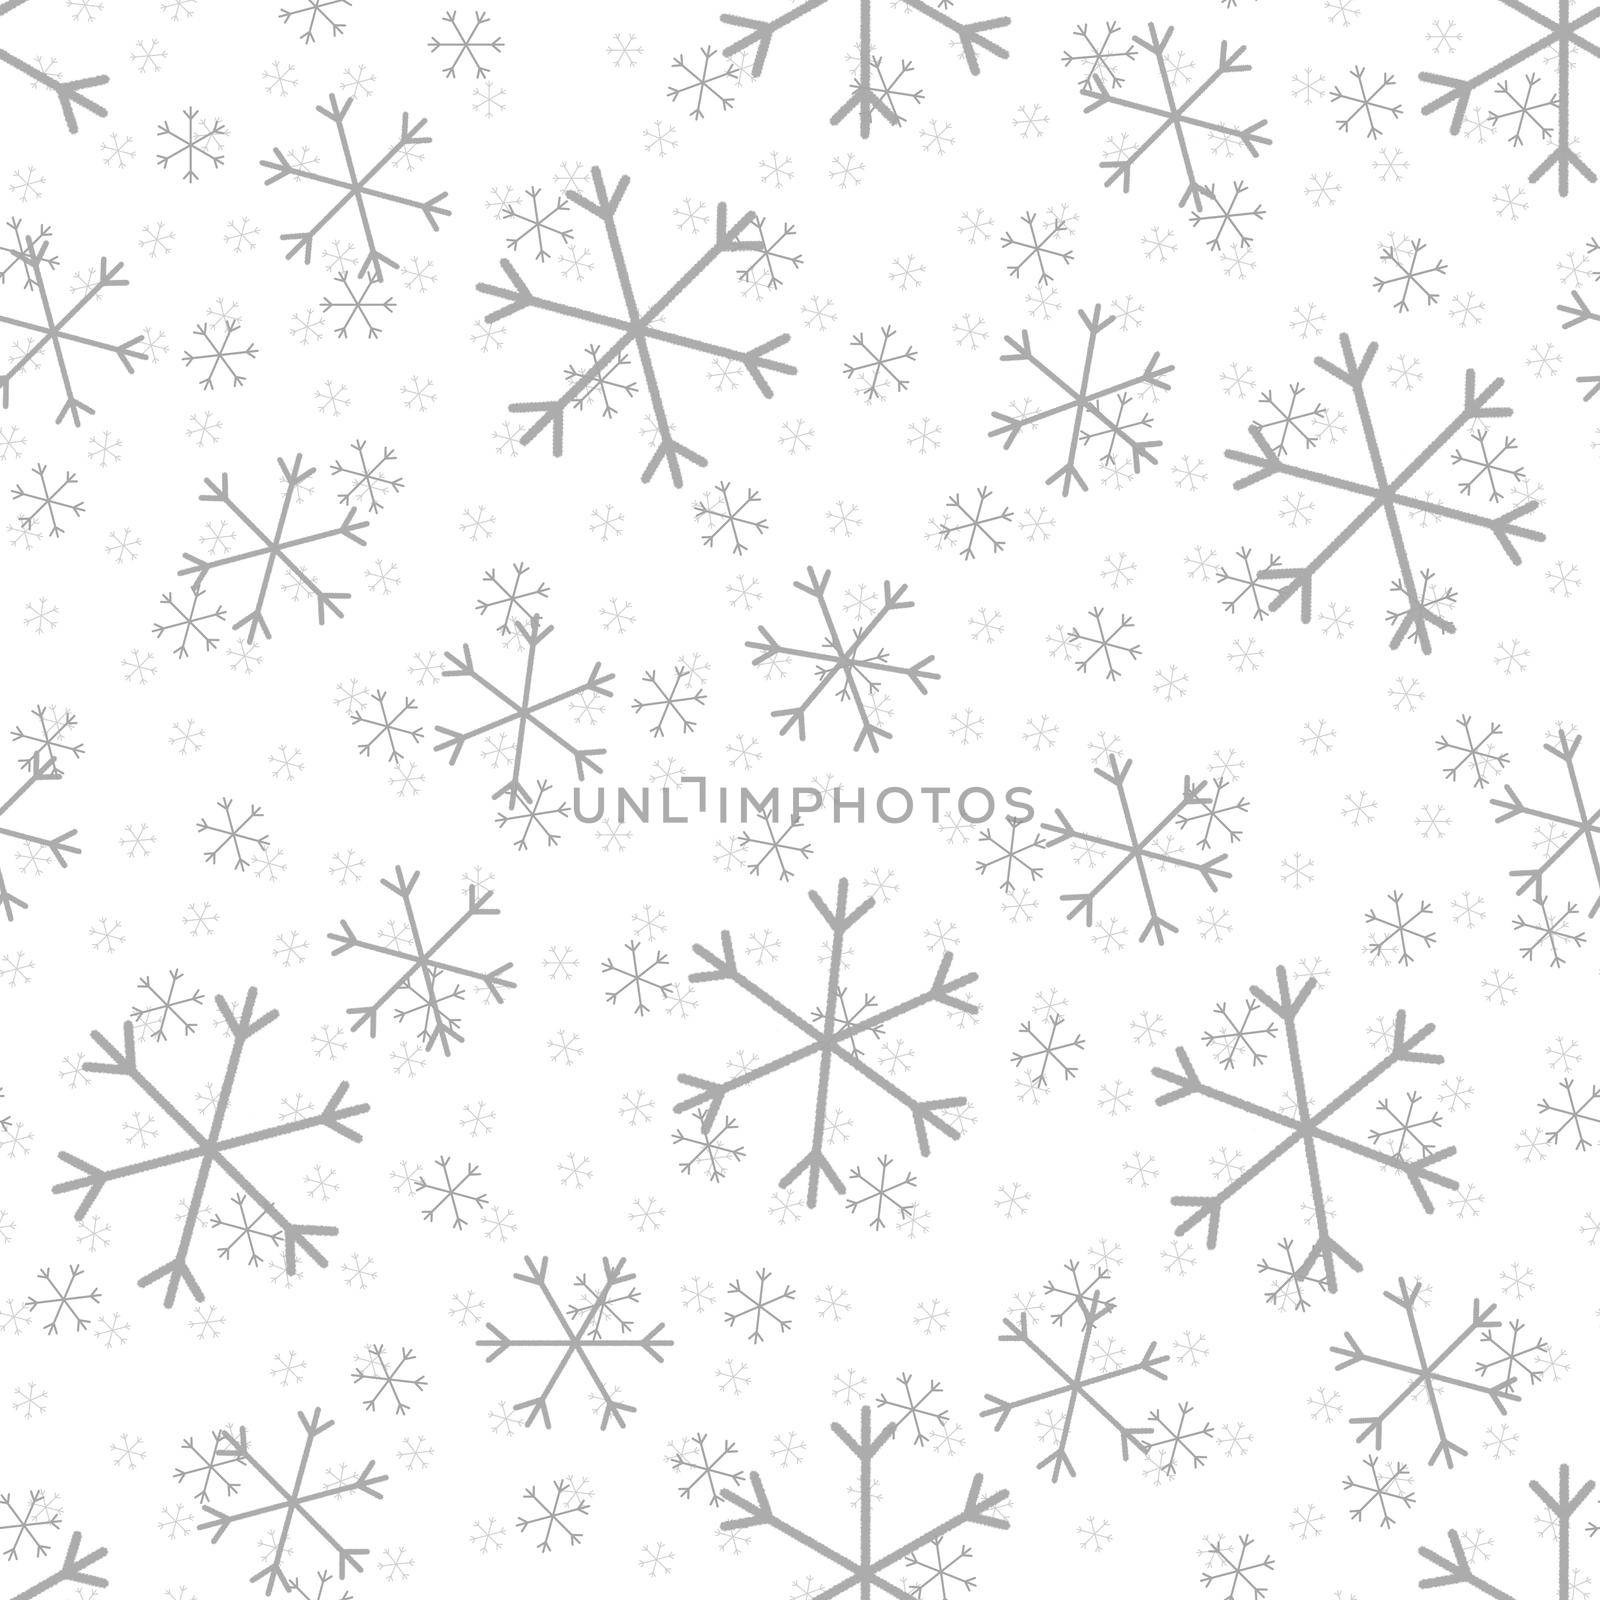 Seamless Christmas pattern doodle with hand random drawn snowflakes.Wrapping paper for presents, funny textile fabric print, design,decor, food wrap, backgrounds. new year.Raster copy.White gray by Angelsmoon